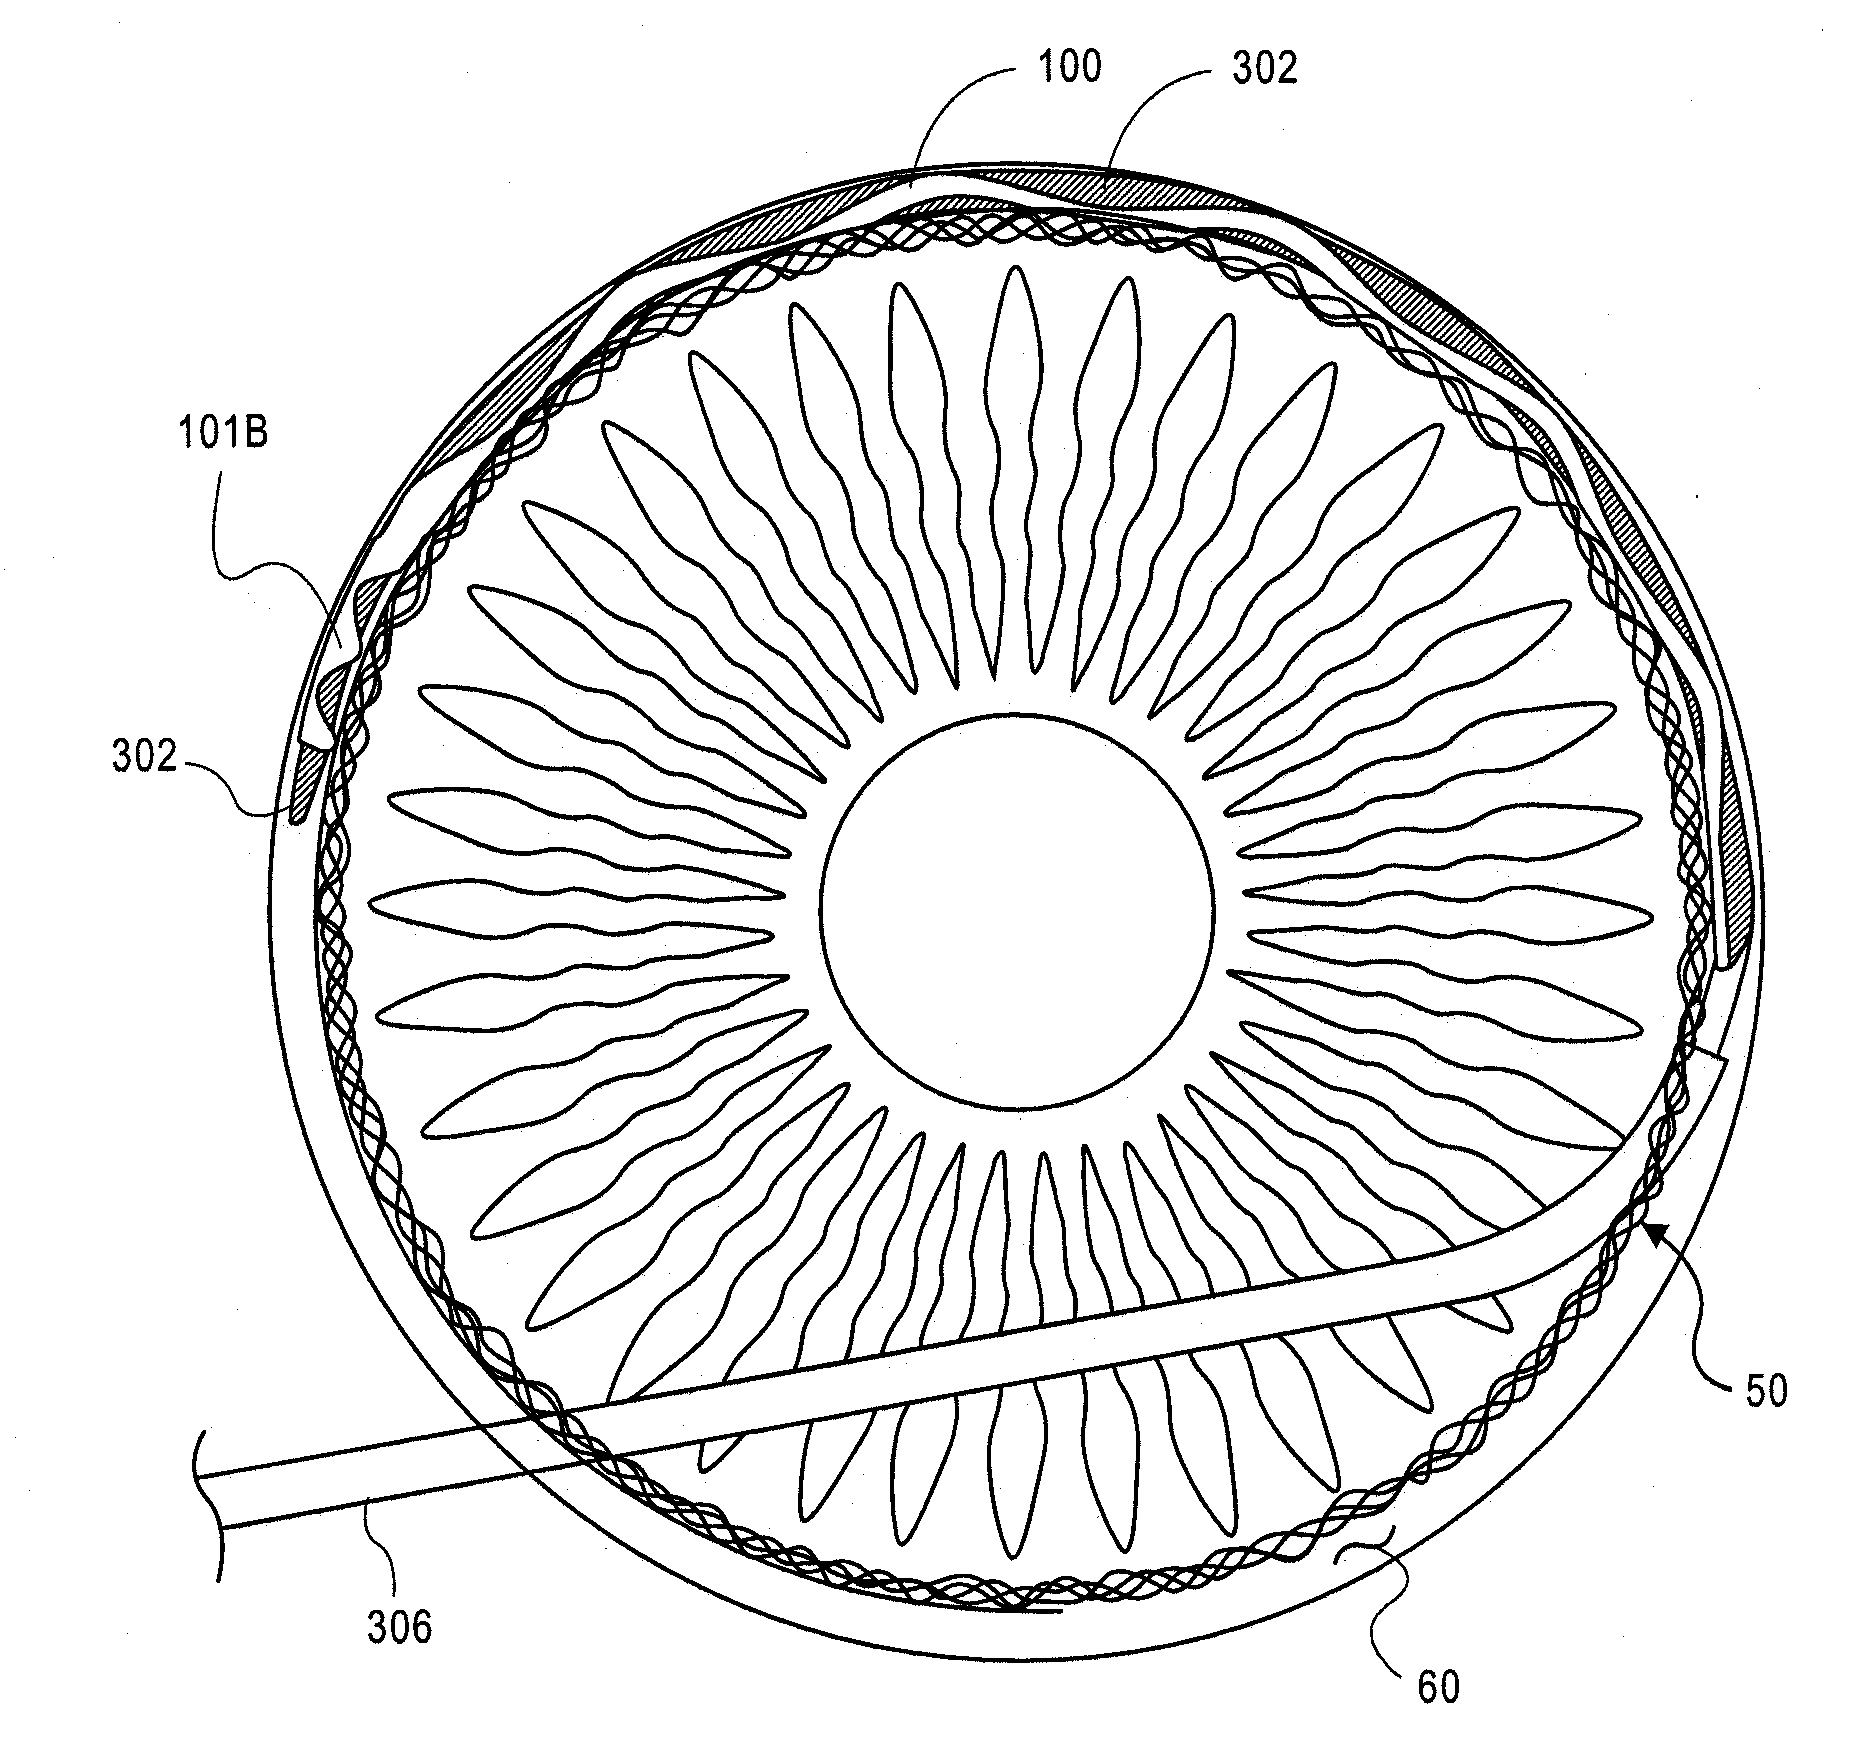 Methods and Apparatus for Treating Glaucoma